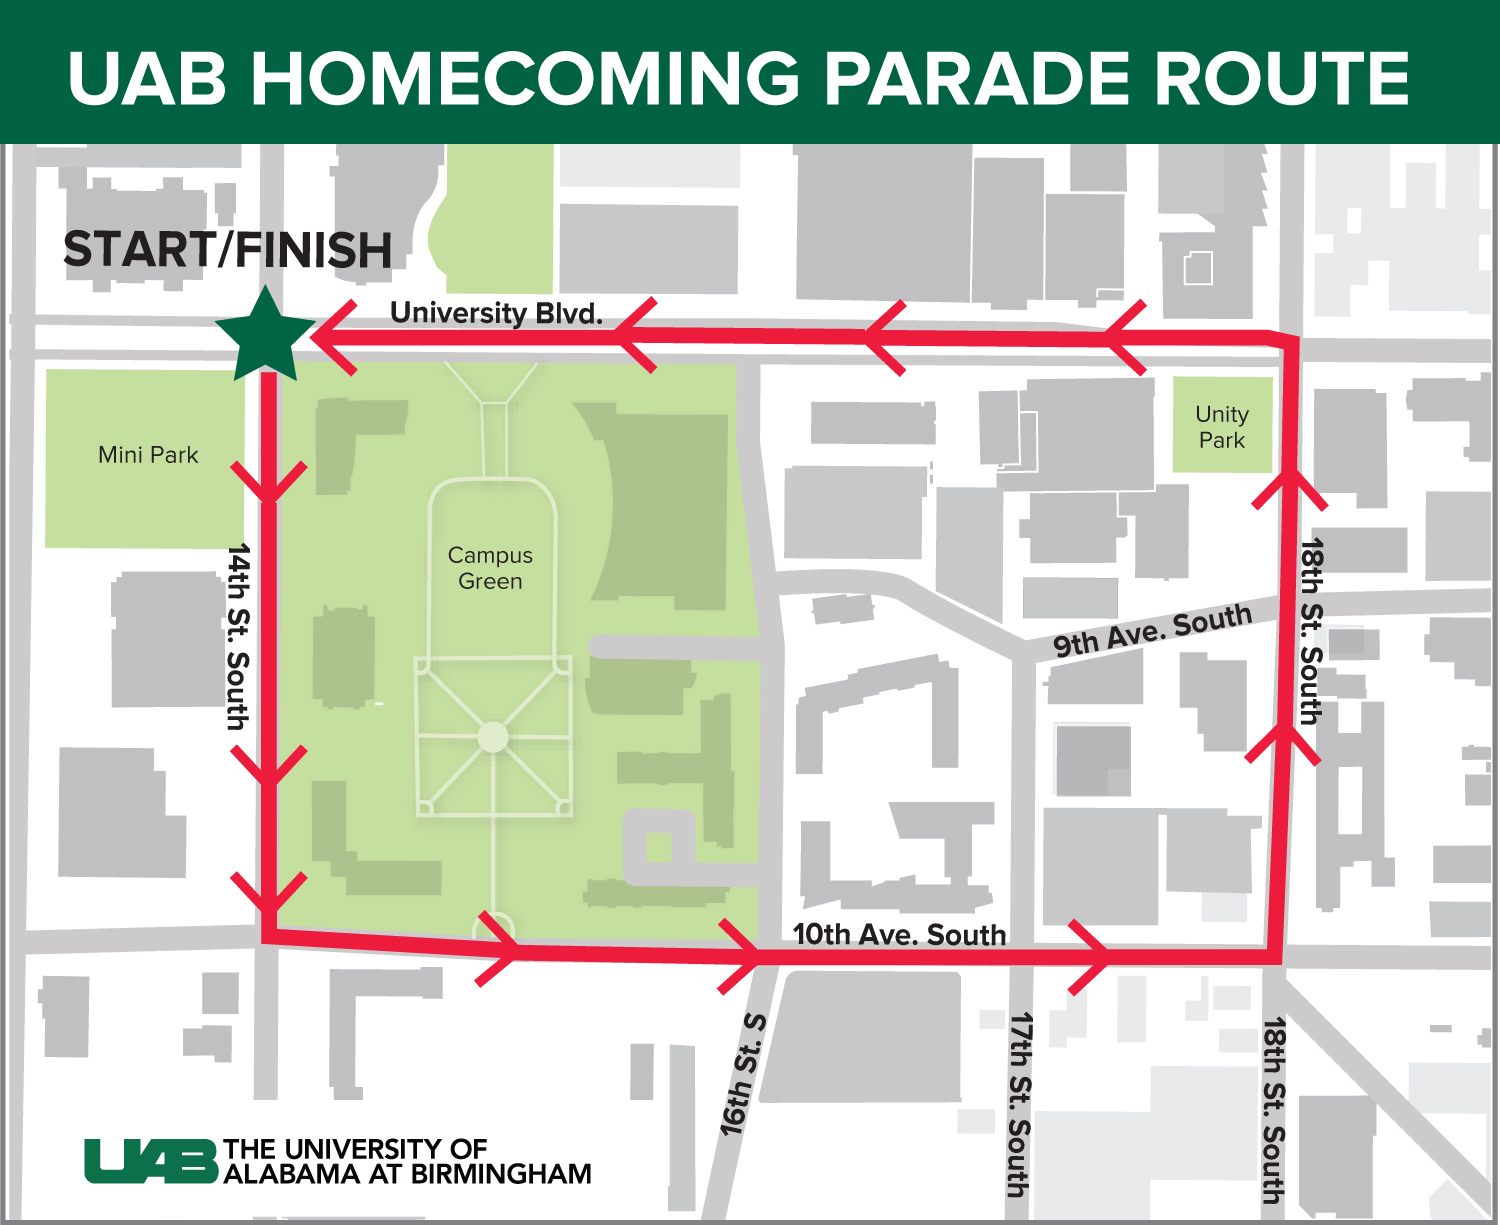 Homecoming Parade route map